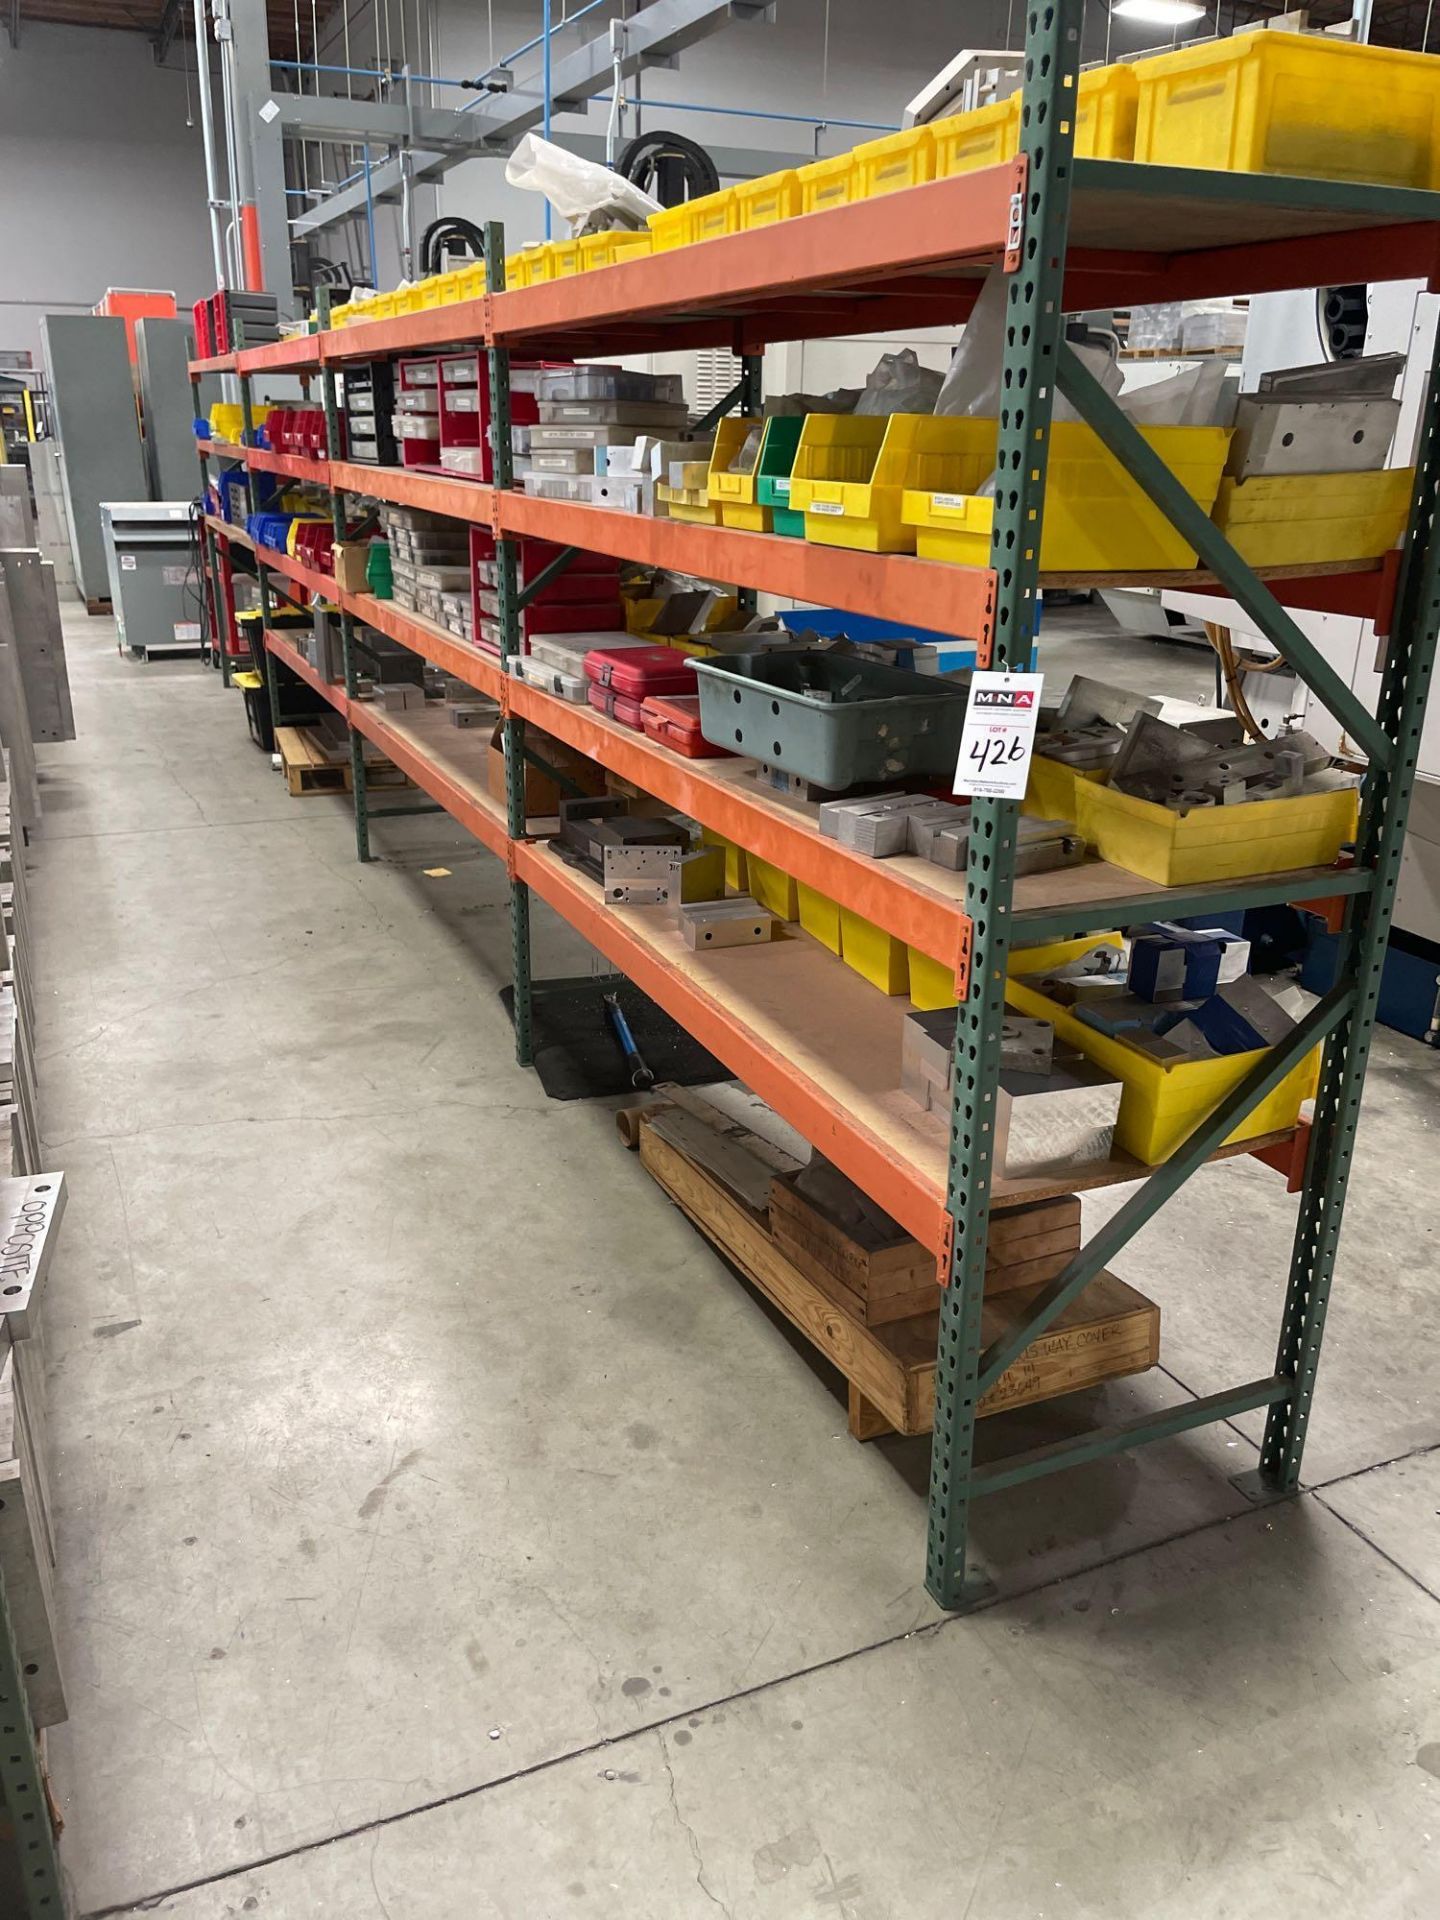 4 Sections of Racking